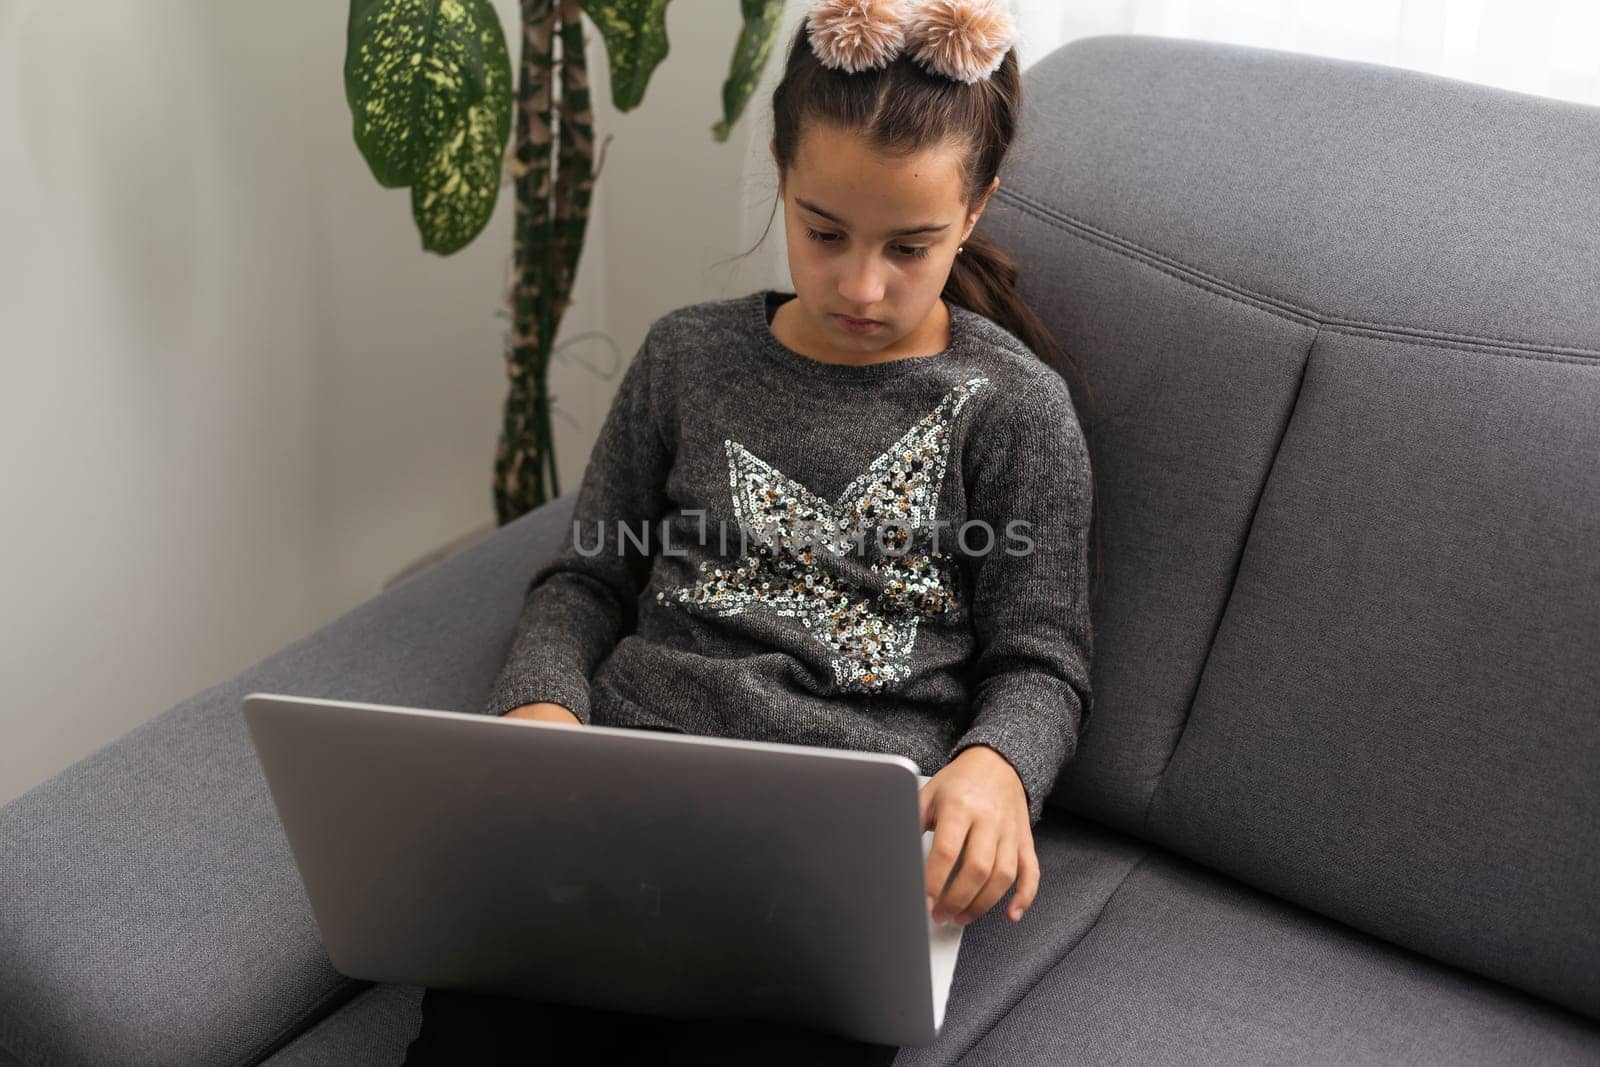 Teen girl school pupil studying online from home making notes. Teenage student distance learning on laptop doing homework, watching listening video lesson. Remote education concept.